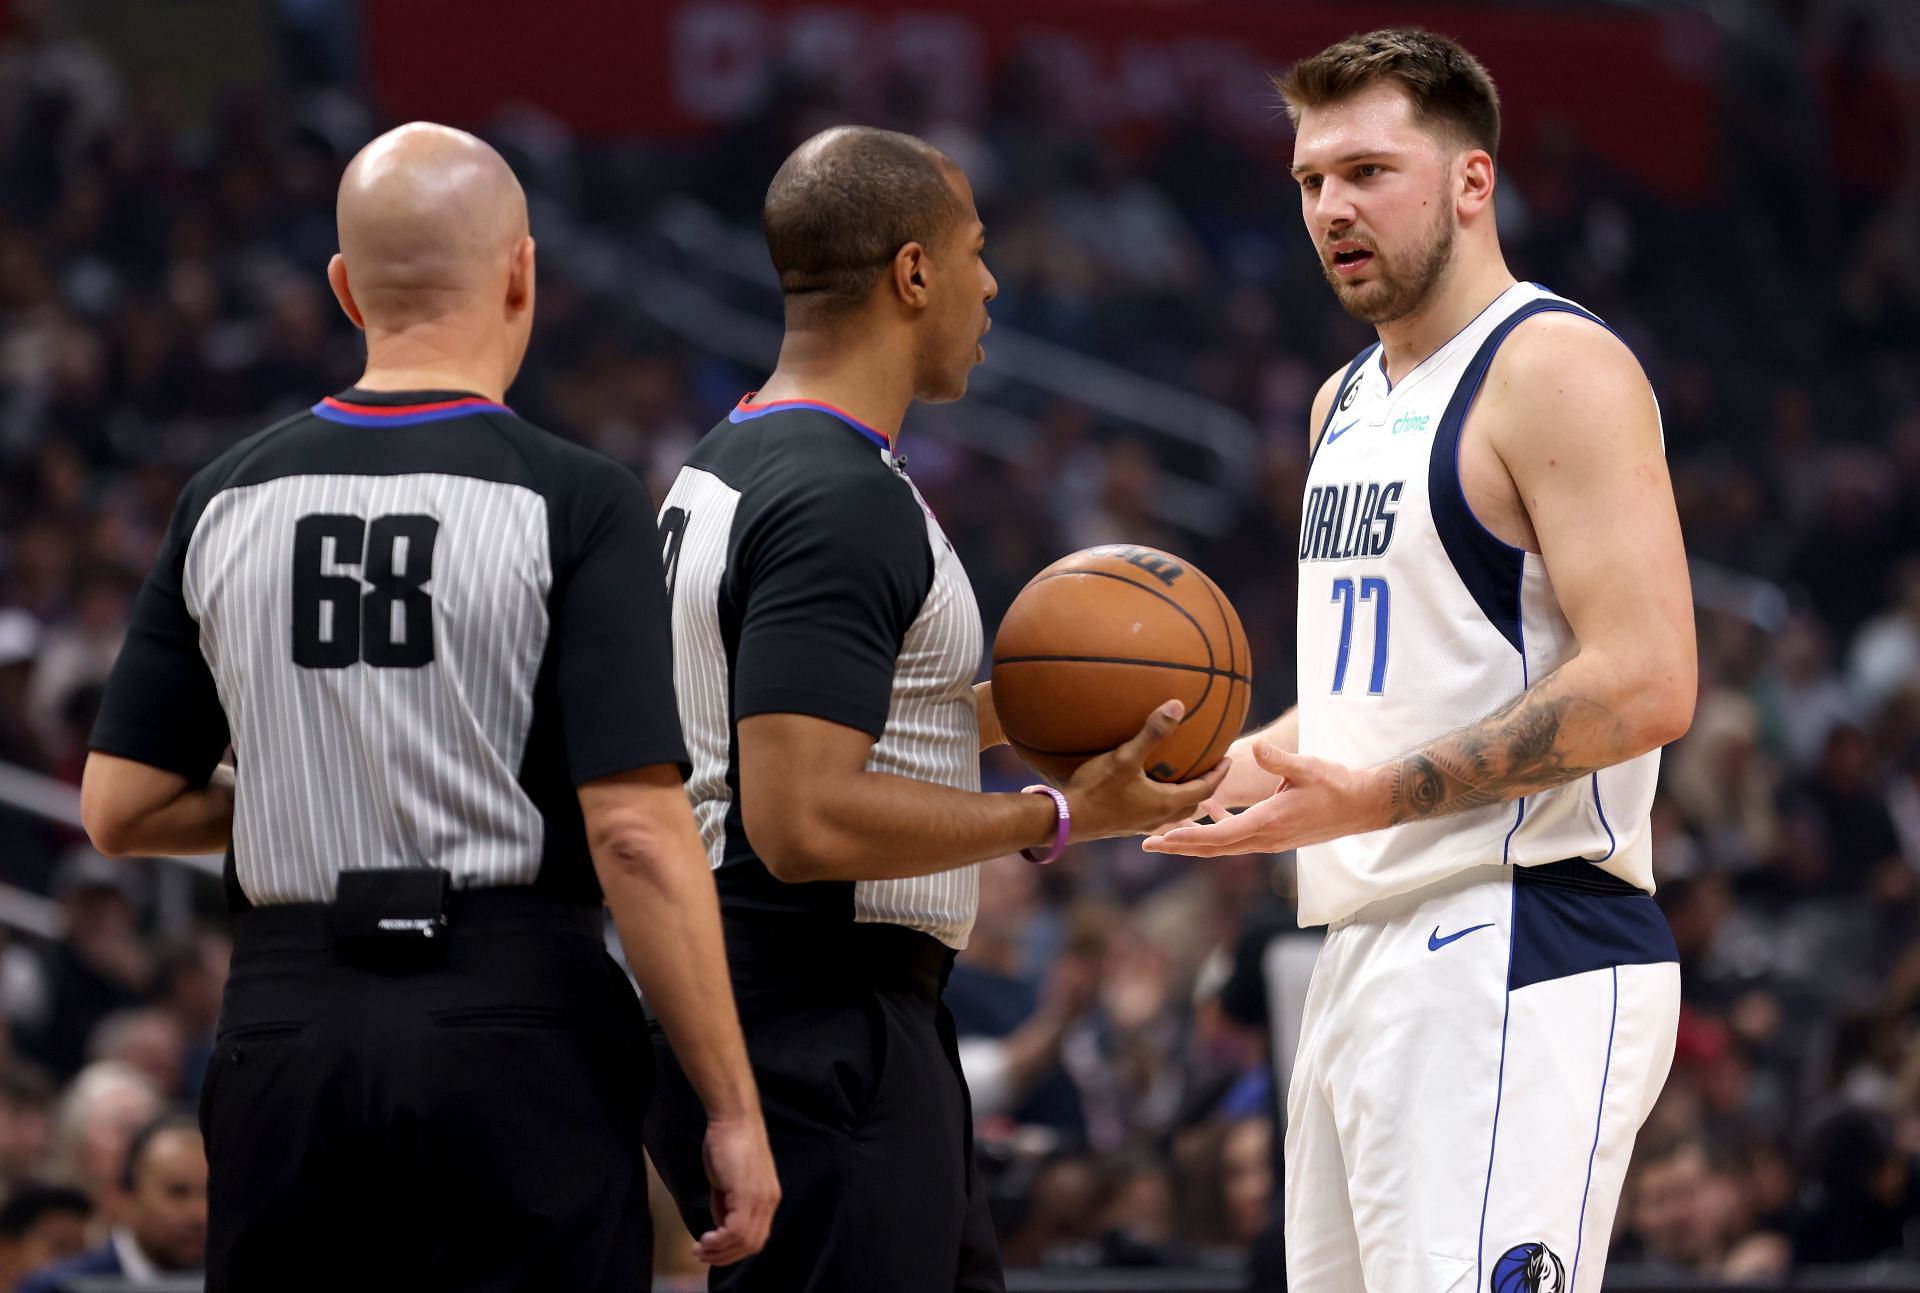 Luka Doncic kept his head in the game despite some questionable calls.